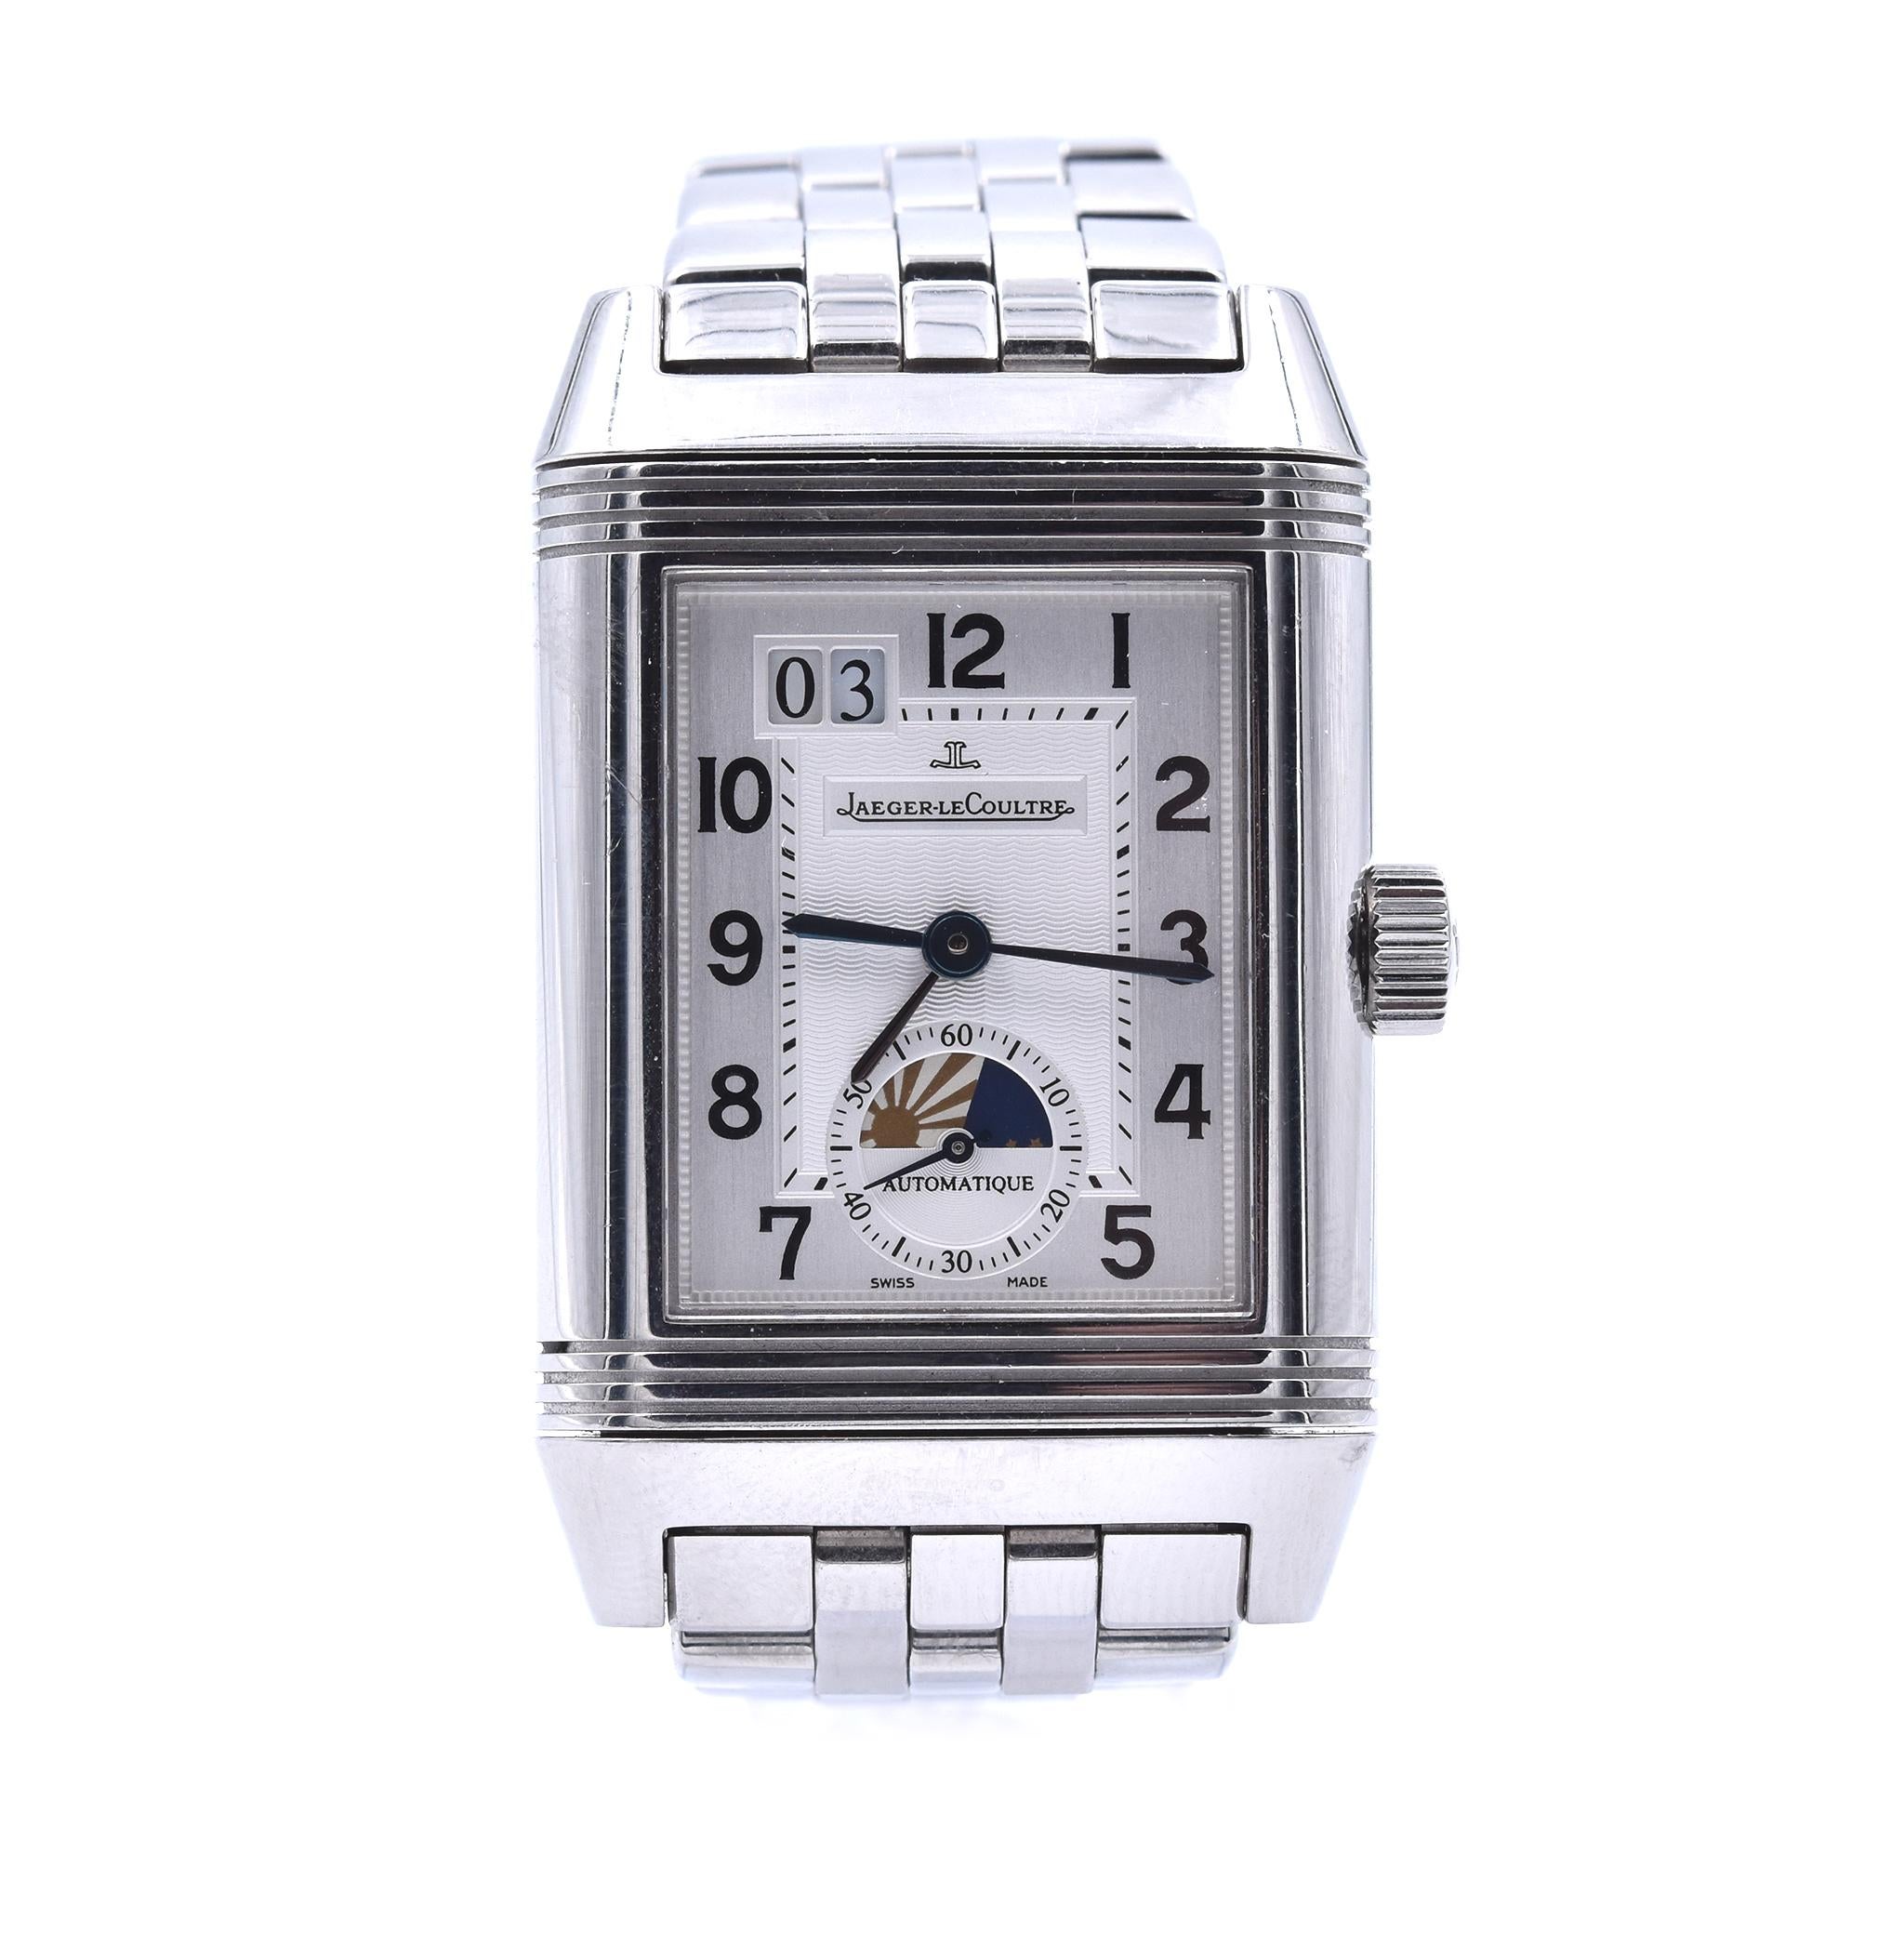 Movement: Automatic Cal JLC 970
Function: hours, minutes, seconds, date at 11 o’clock, day/night indicator
Case: 47x29mm stainless steel rectangular case, sapphire protective crystal, push/pull crown, water resistant to 30m
Dial: silver dial with